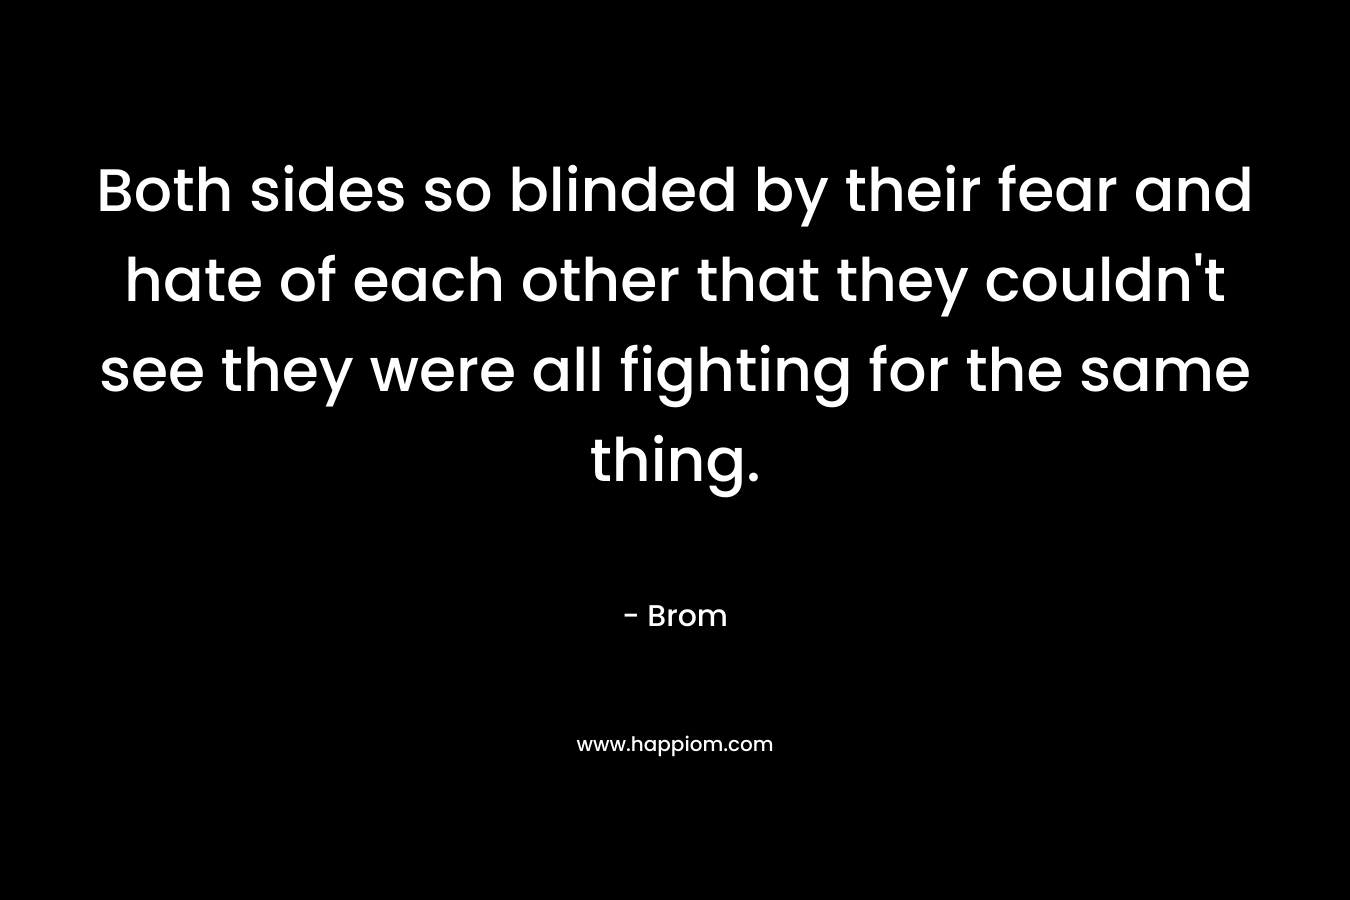 Both sides so blinded by their fear and hate of each other that they couldn't see they were all fighting for the same thing.